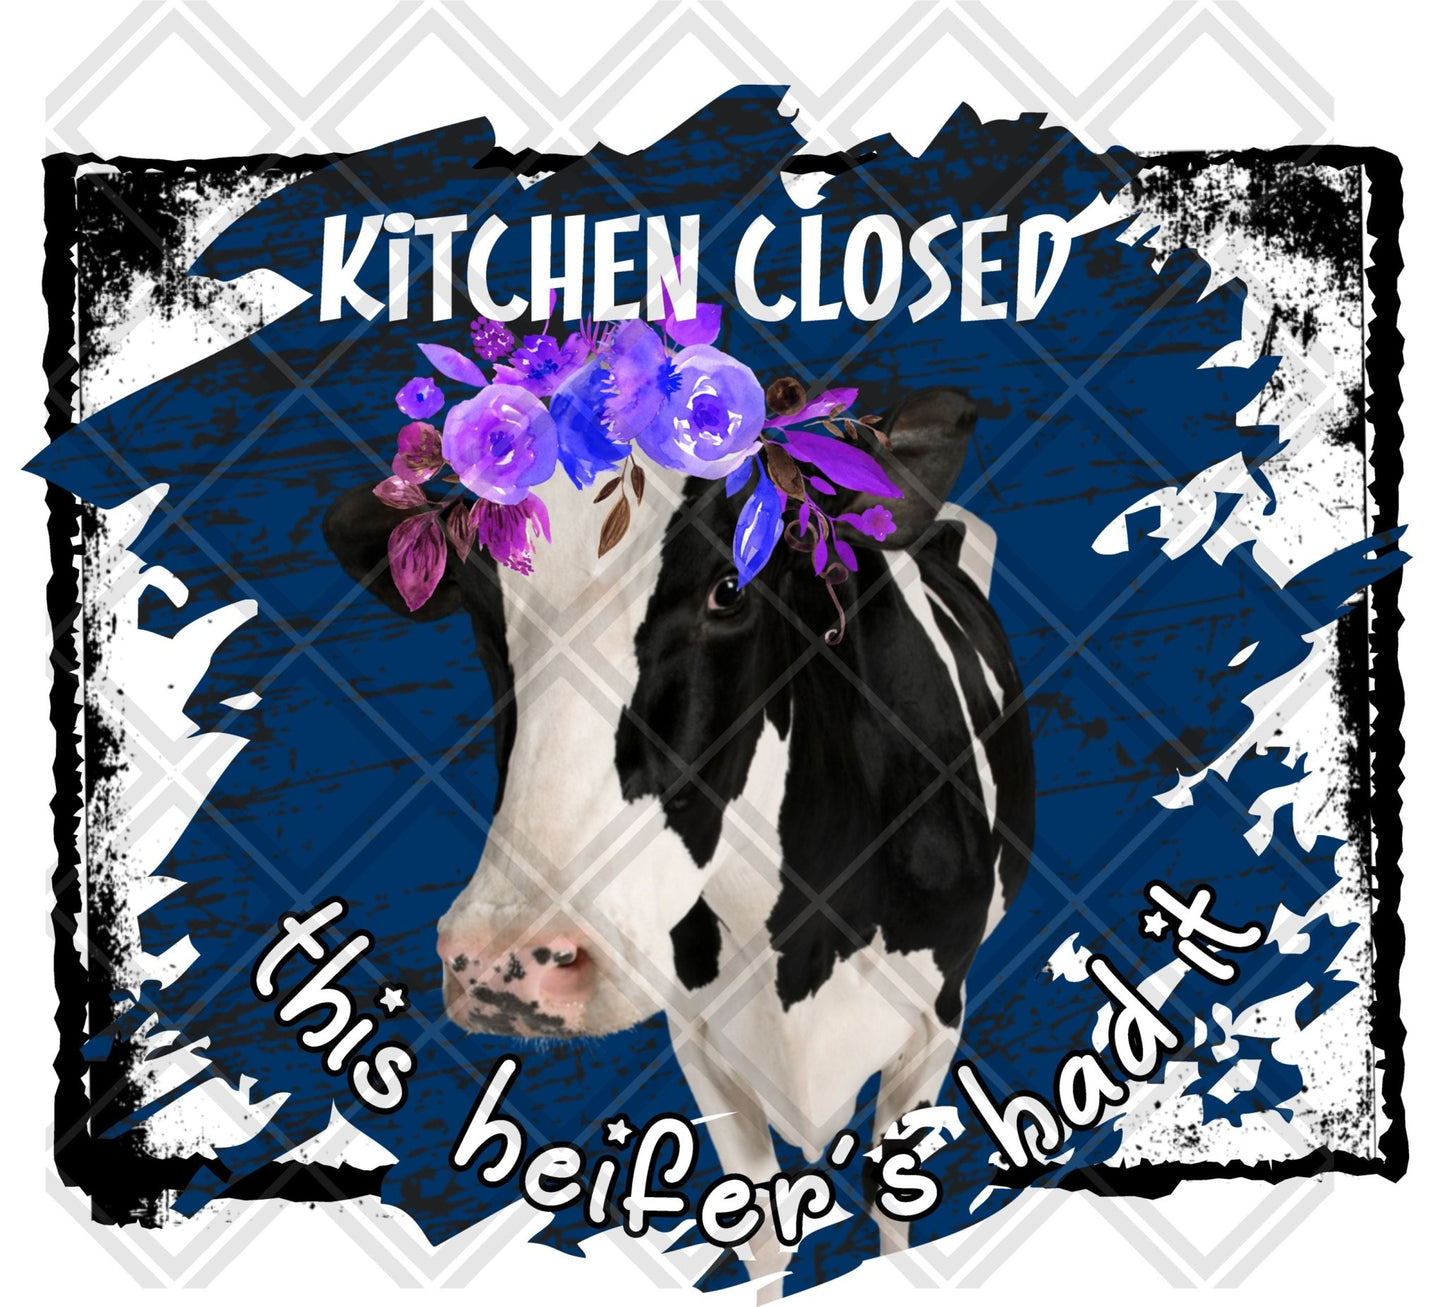 Kitchen closed this hiefer's had it FRAME Digital Download Instand Download - Do it yourself Transfers